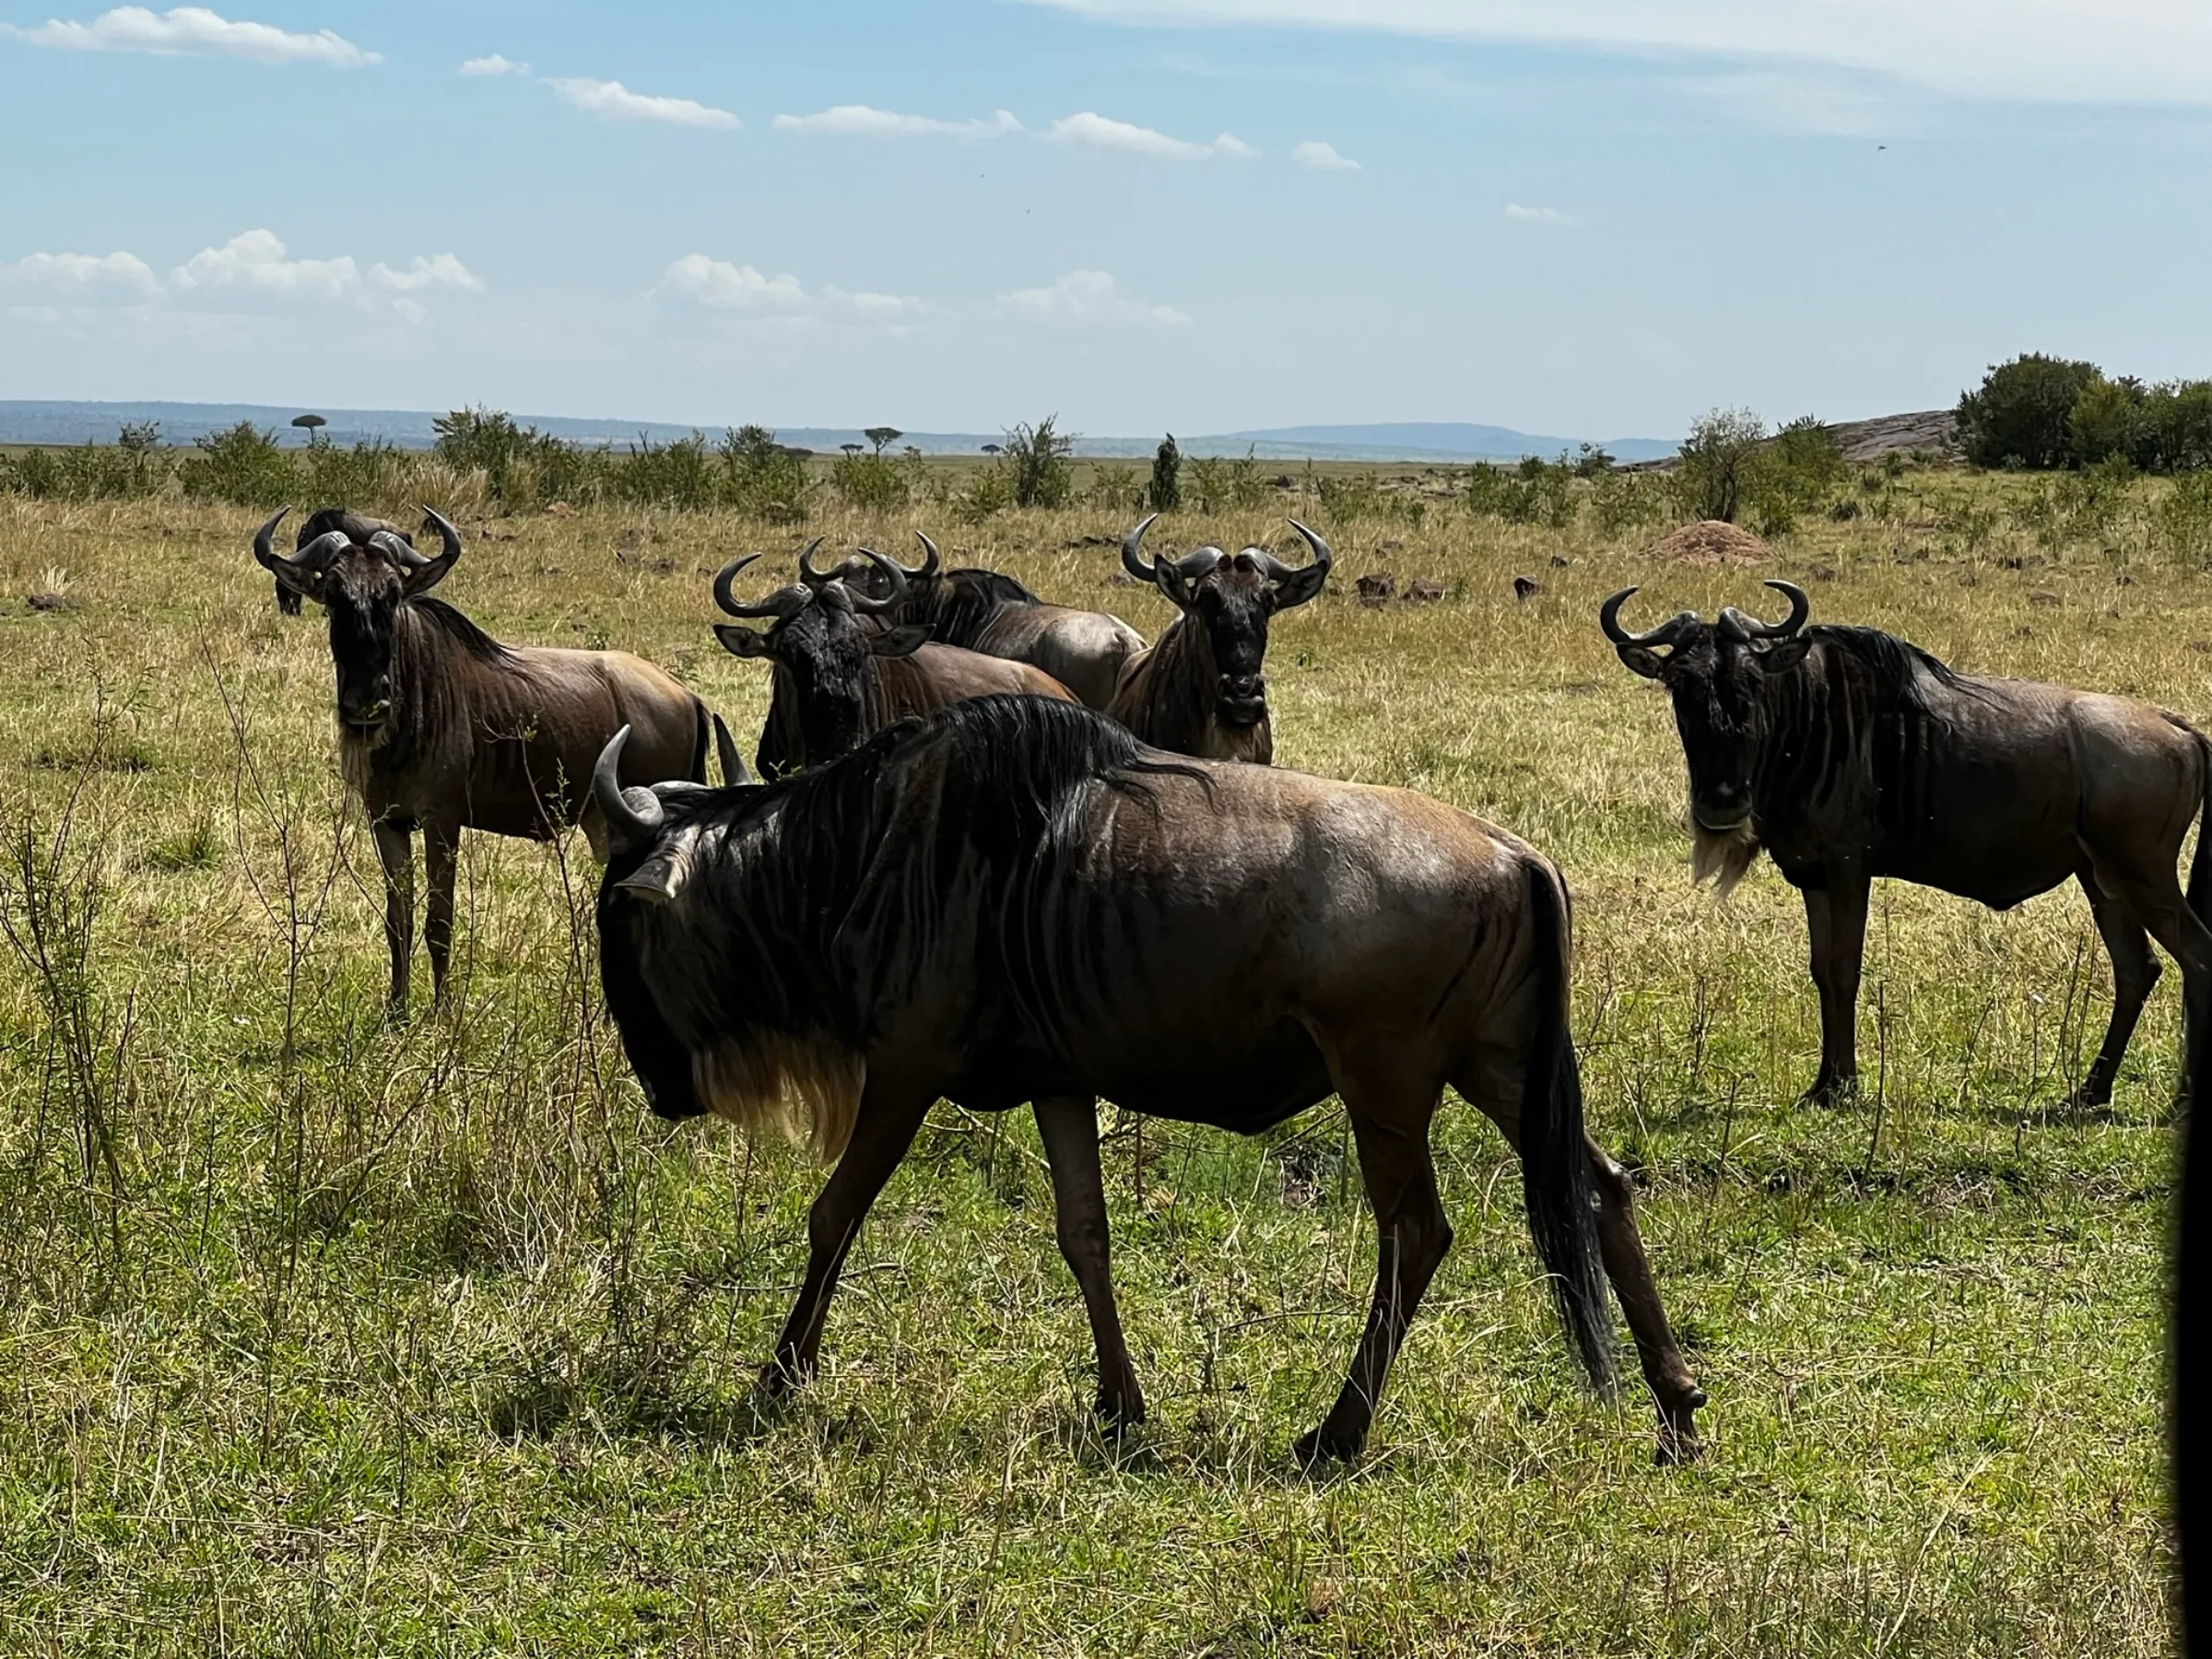 A herd of wildebeest at the Maasai Mara National Reserve, in Kenya on Sept 28 2022. THOMSON REUTERS FOUNDATION/Nita Bhalla